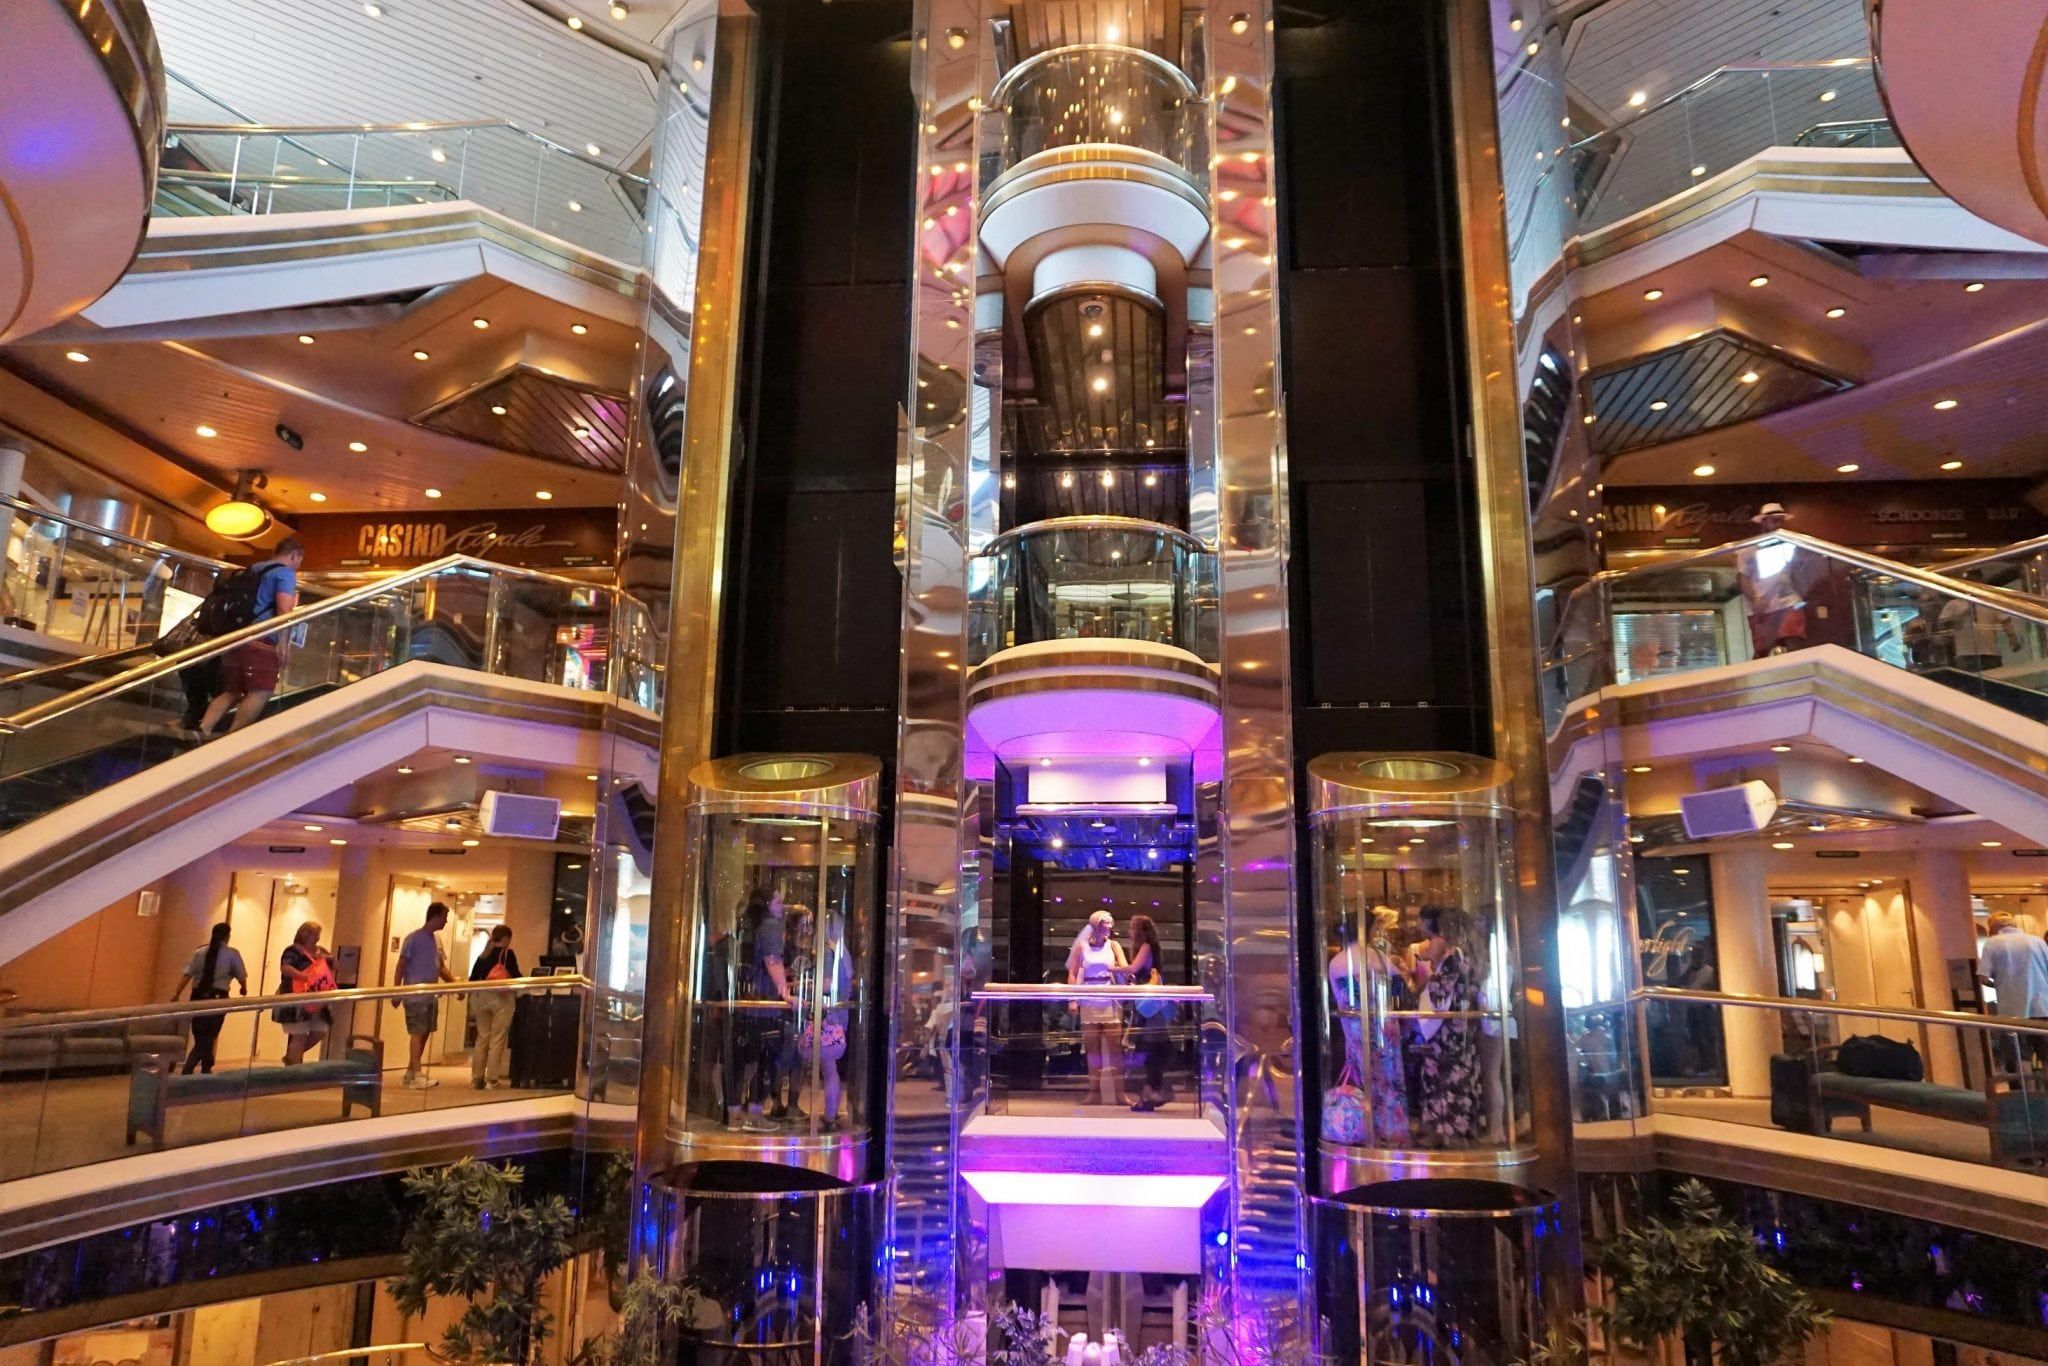 Cruise Ship Review: Royal Caribbean Majesty of the Seas – How Do I